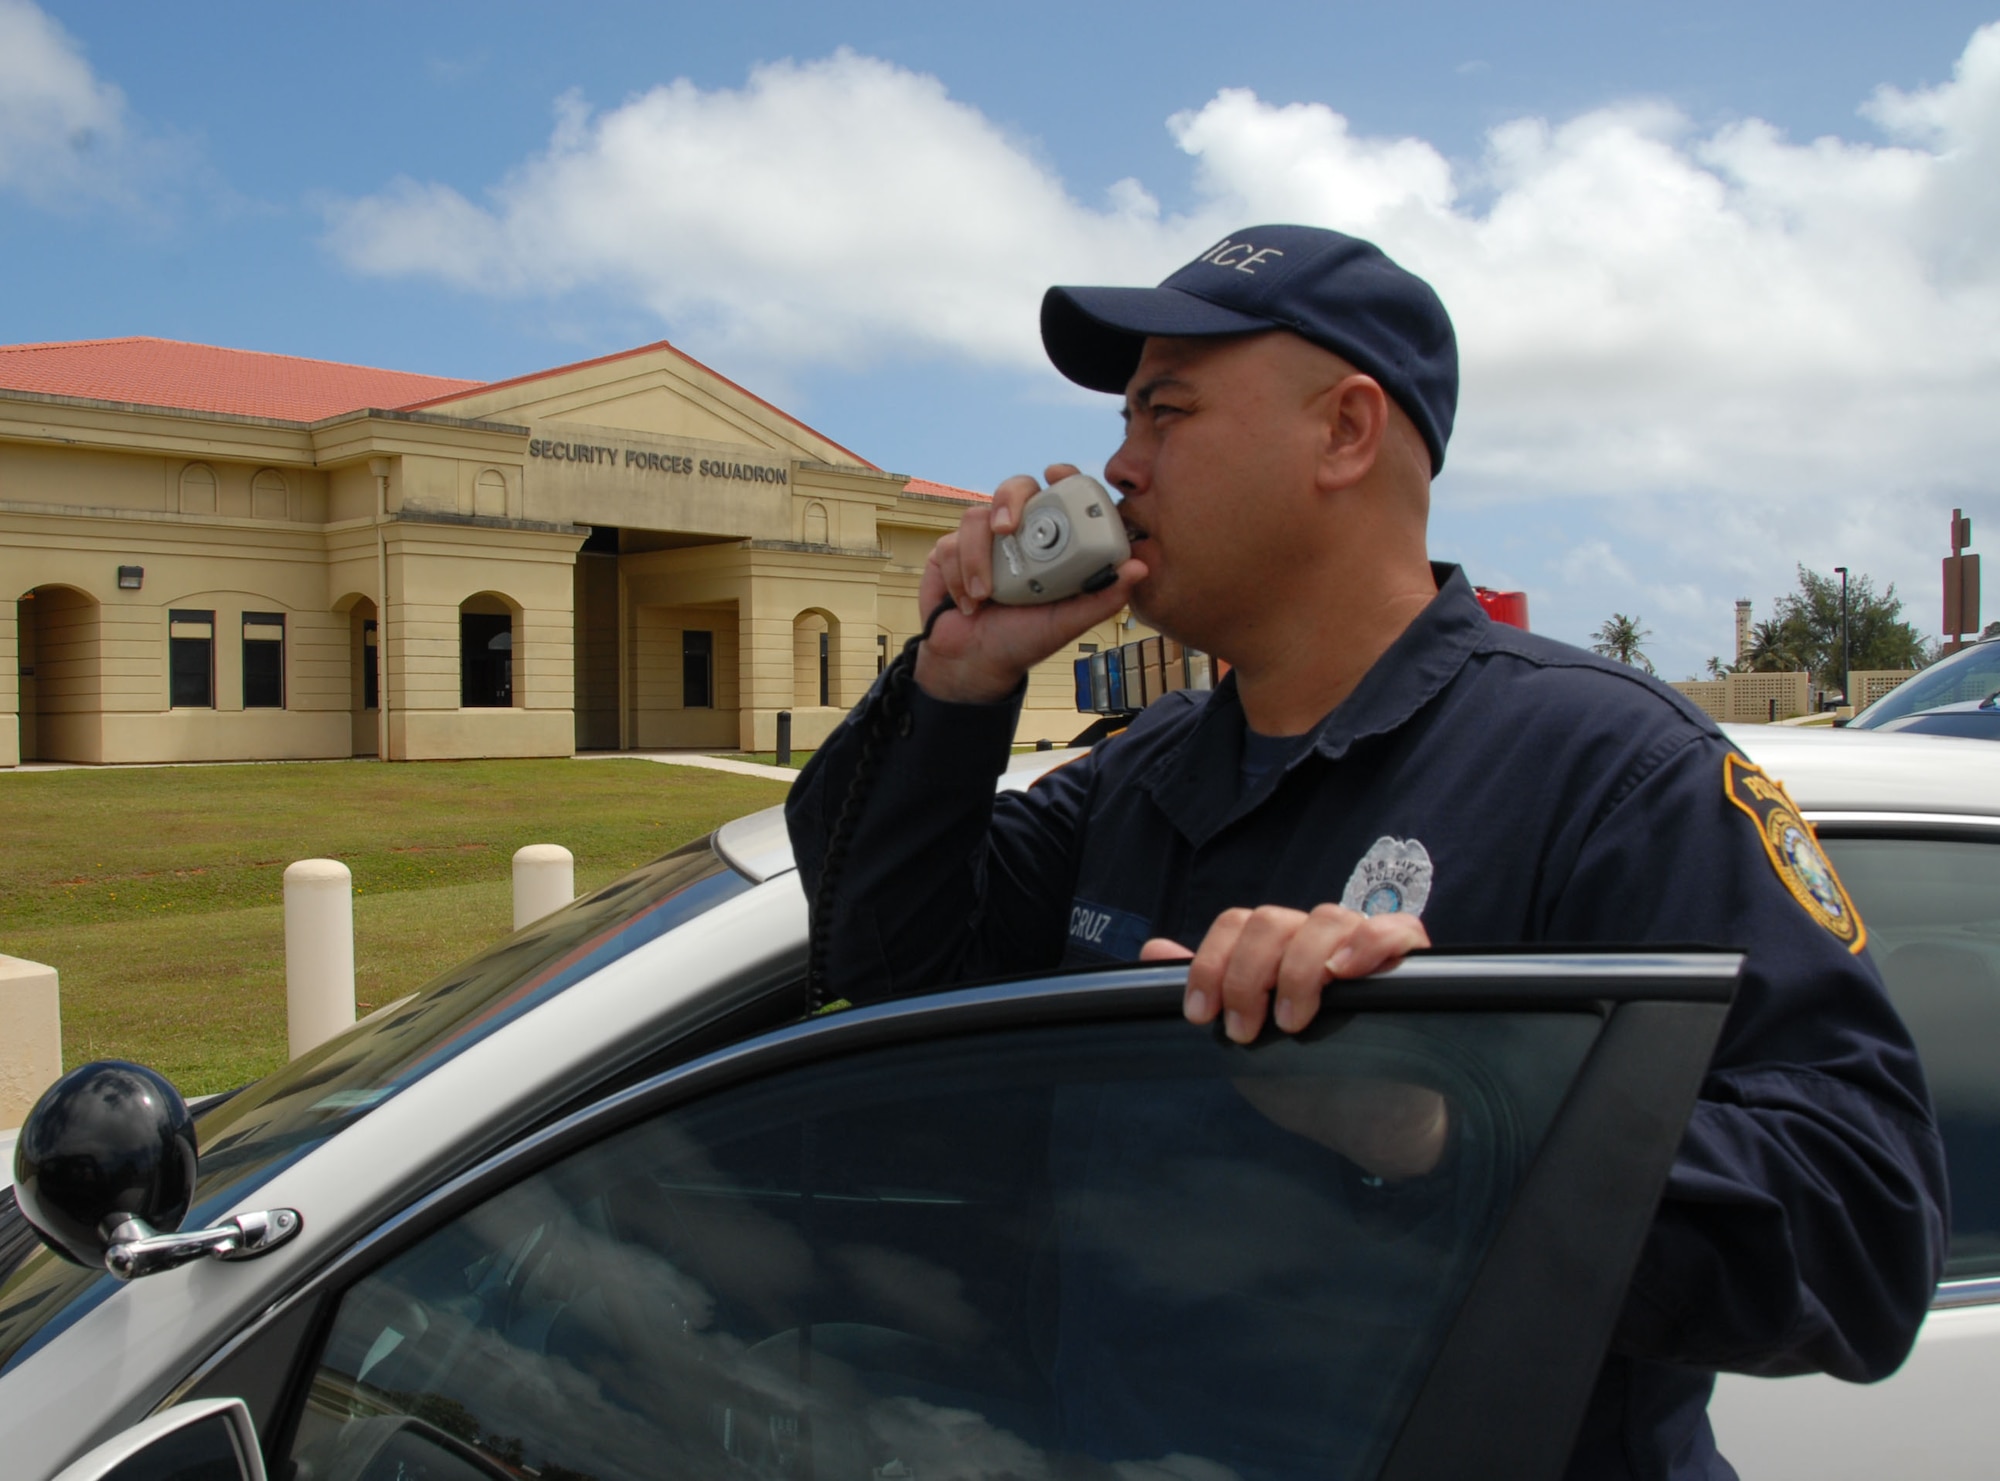 ANDERSEN AIR FORCE BASE, Guam -- Sgt. Jesse Cruz, a security contractor calls for back up during a security forces training mission, here April 16. Sergeant Cruz is the lead police officer for the Air Force security integration recruitment program on Andersen Air Force Base (U.S. Air Force photo by Staff Sgt. Derrick Spencer)